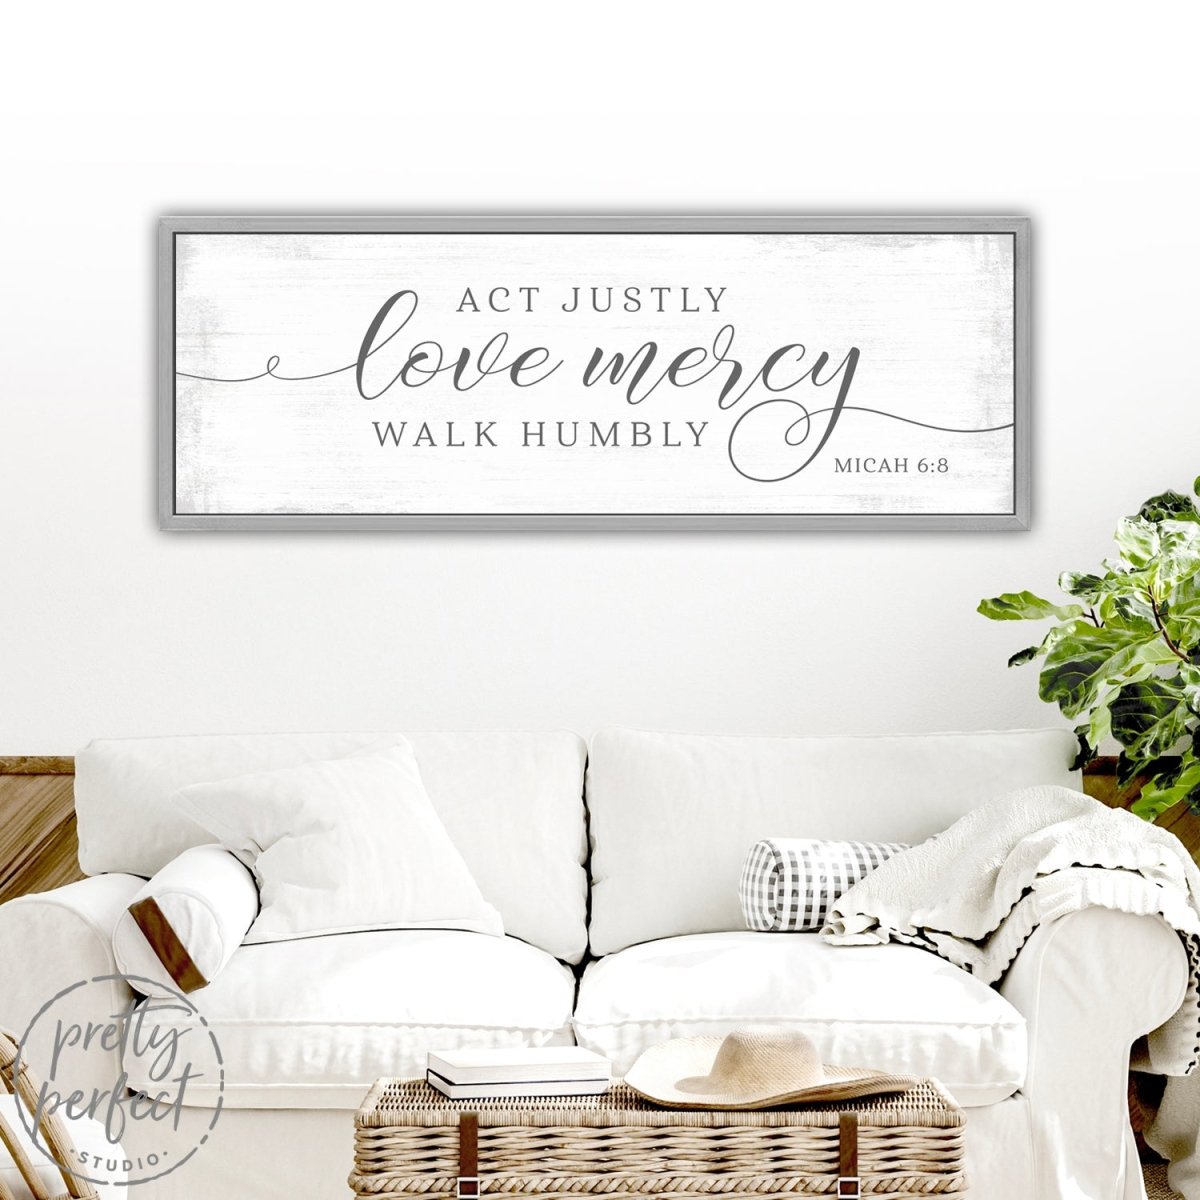 Act Justly Love Mercy Walk Humbly Canvas Wall Art Above Couch - Pretty Perfect Studio